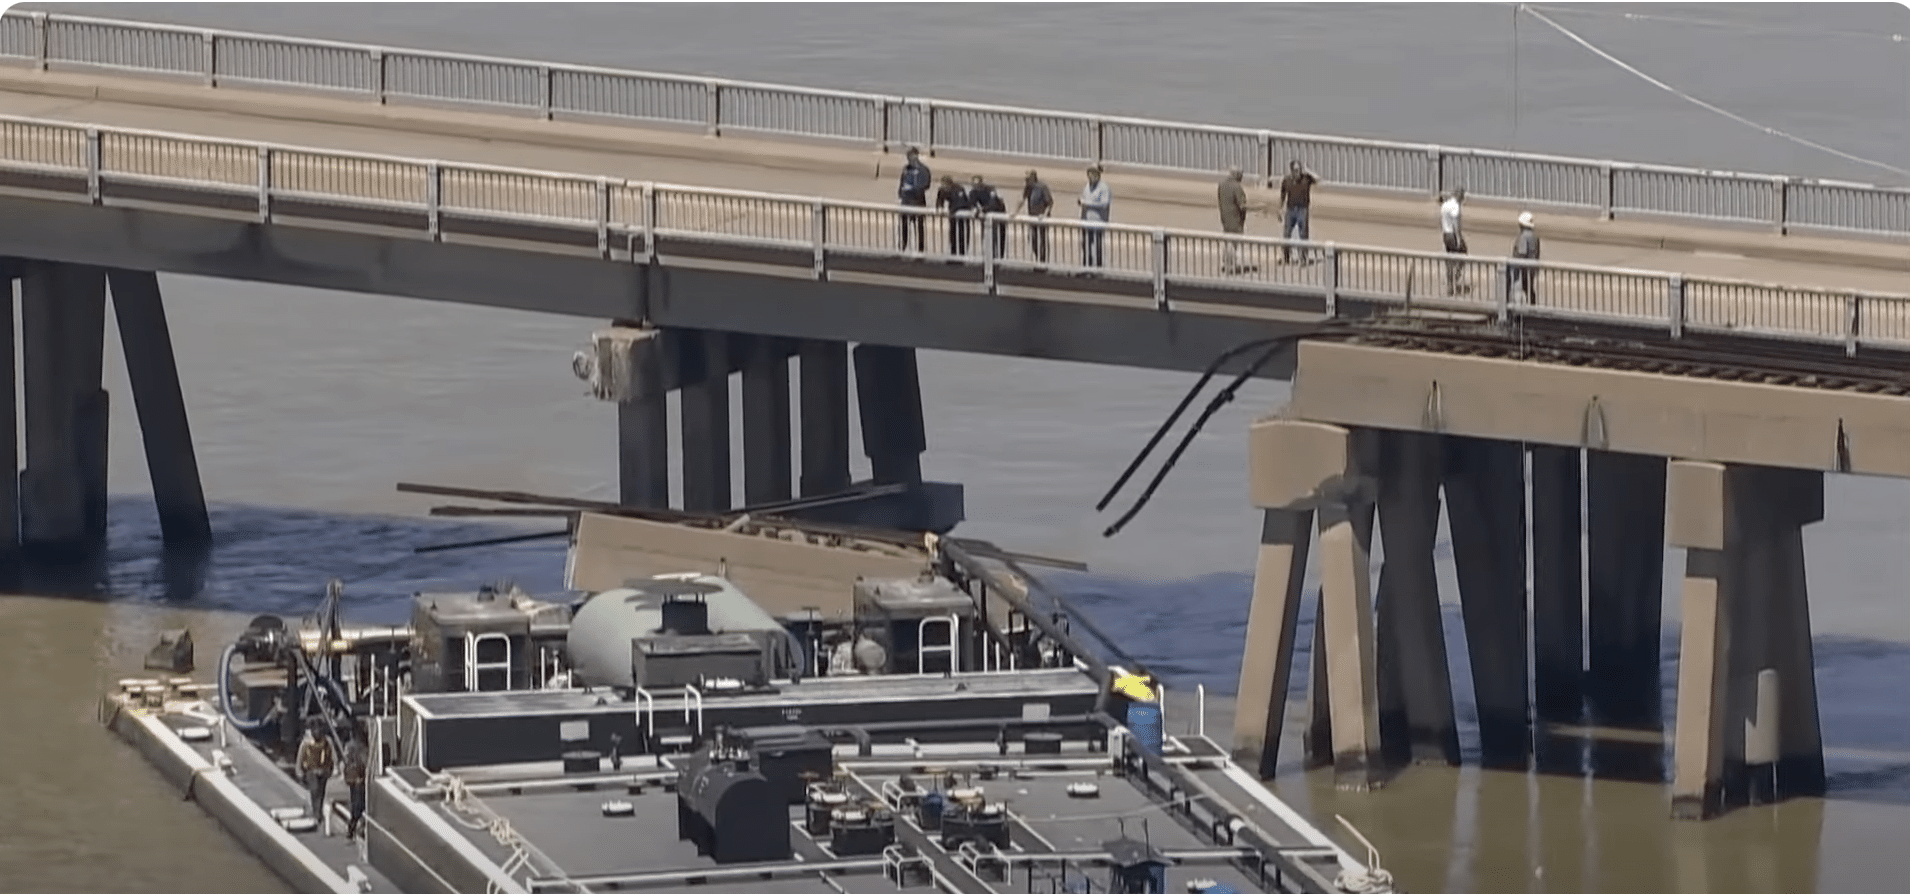 Barge strikes bridge in Galveston, Texas, damaging structure, causes oil spill, Waterway closed